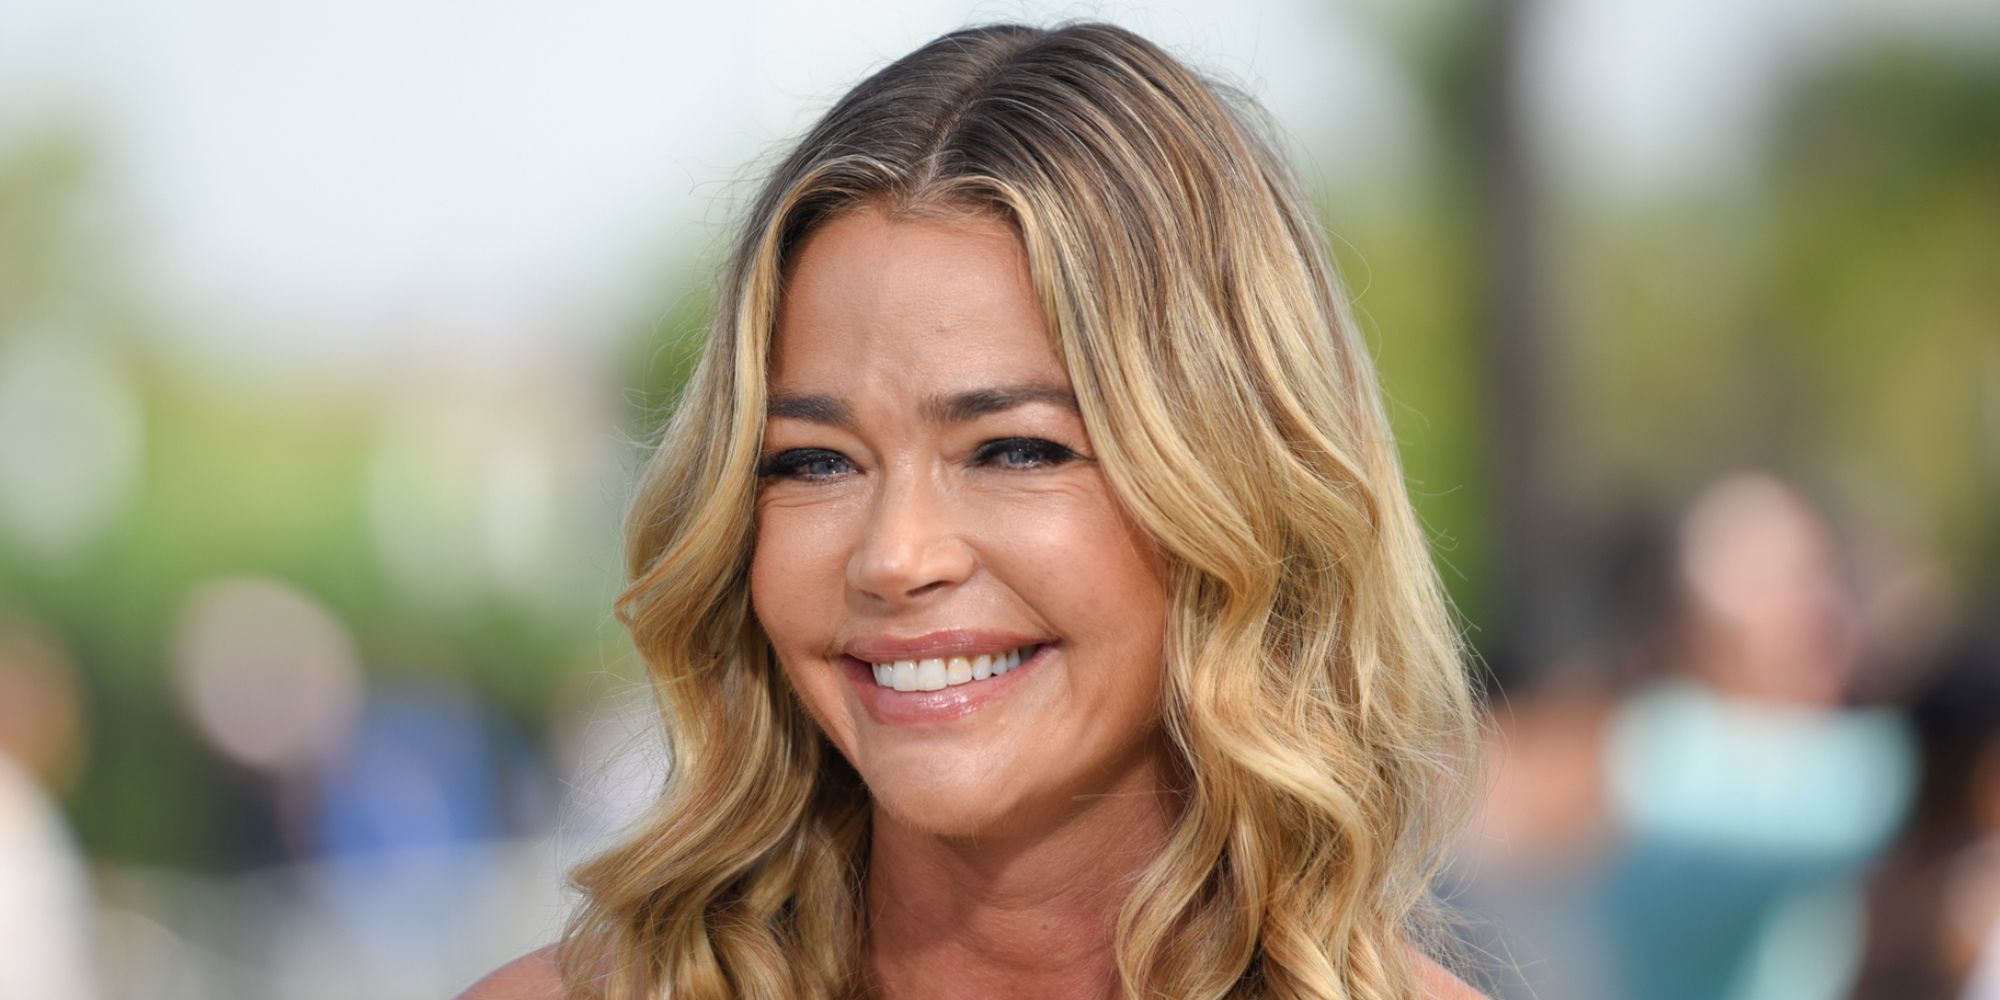 Denise Richards of The Real Housewives of Beverly Hills